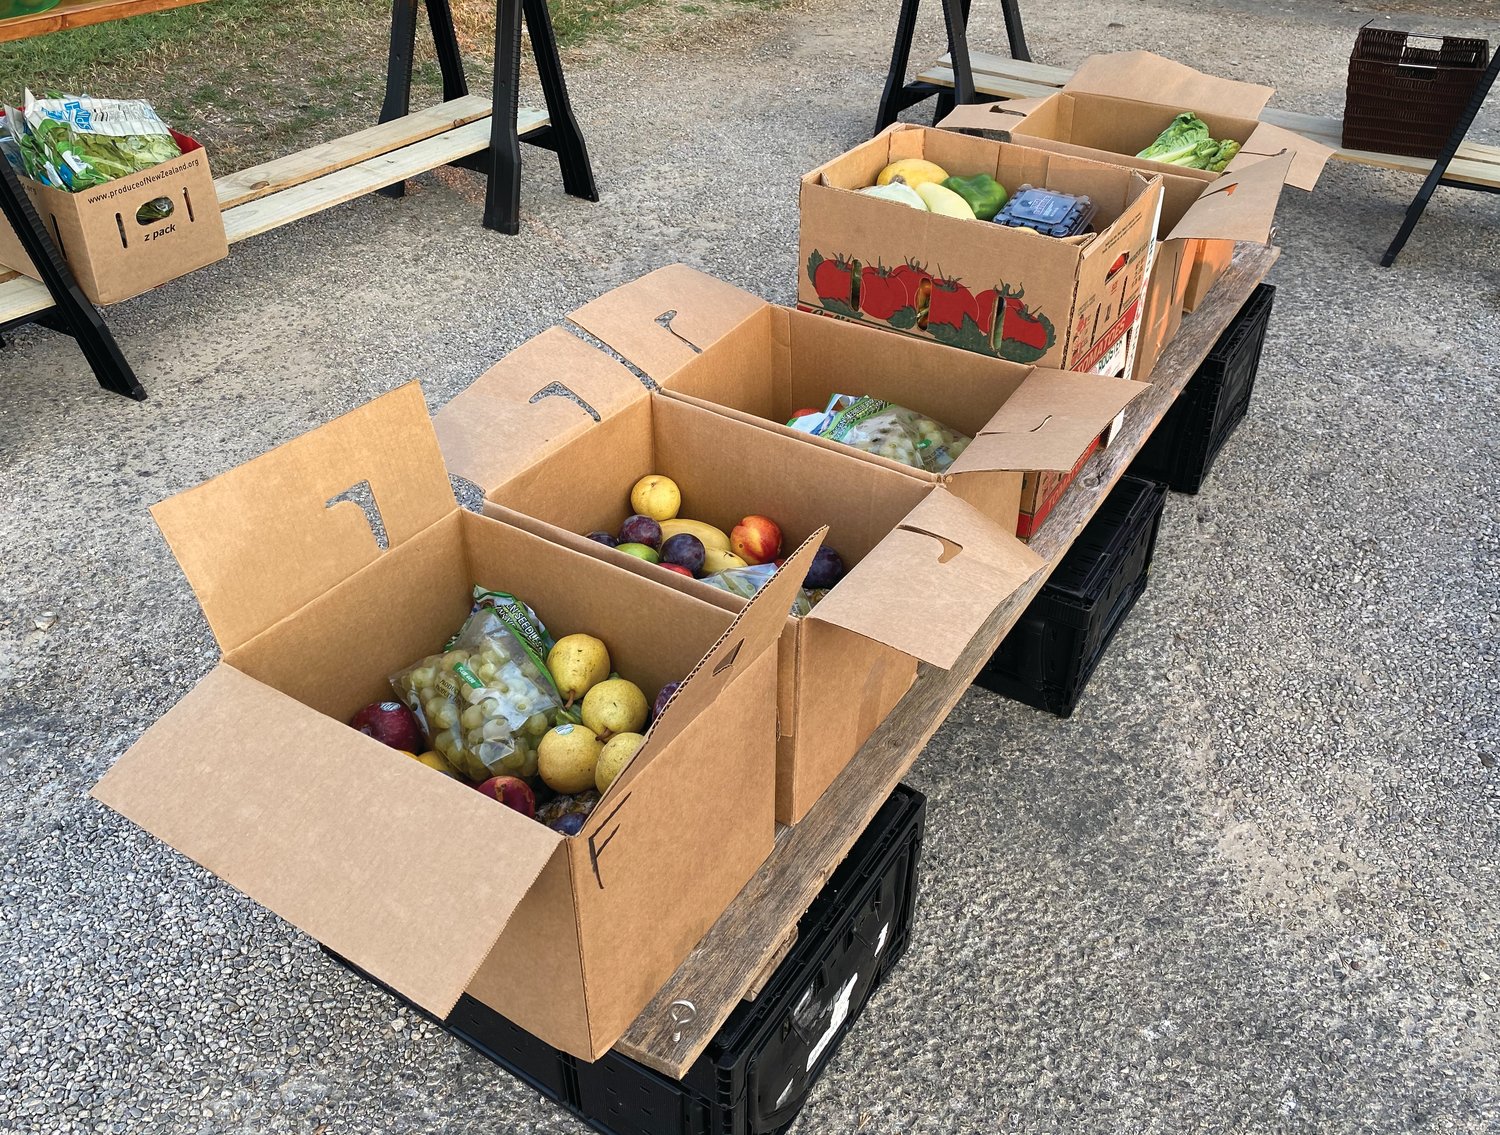 Renee Trip sells 18-pound boxes of vegetables, fruits or a mixture of both, to support her mission to bring affordable produce to the area.